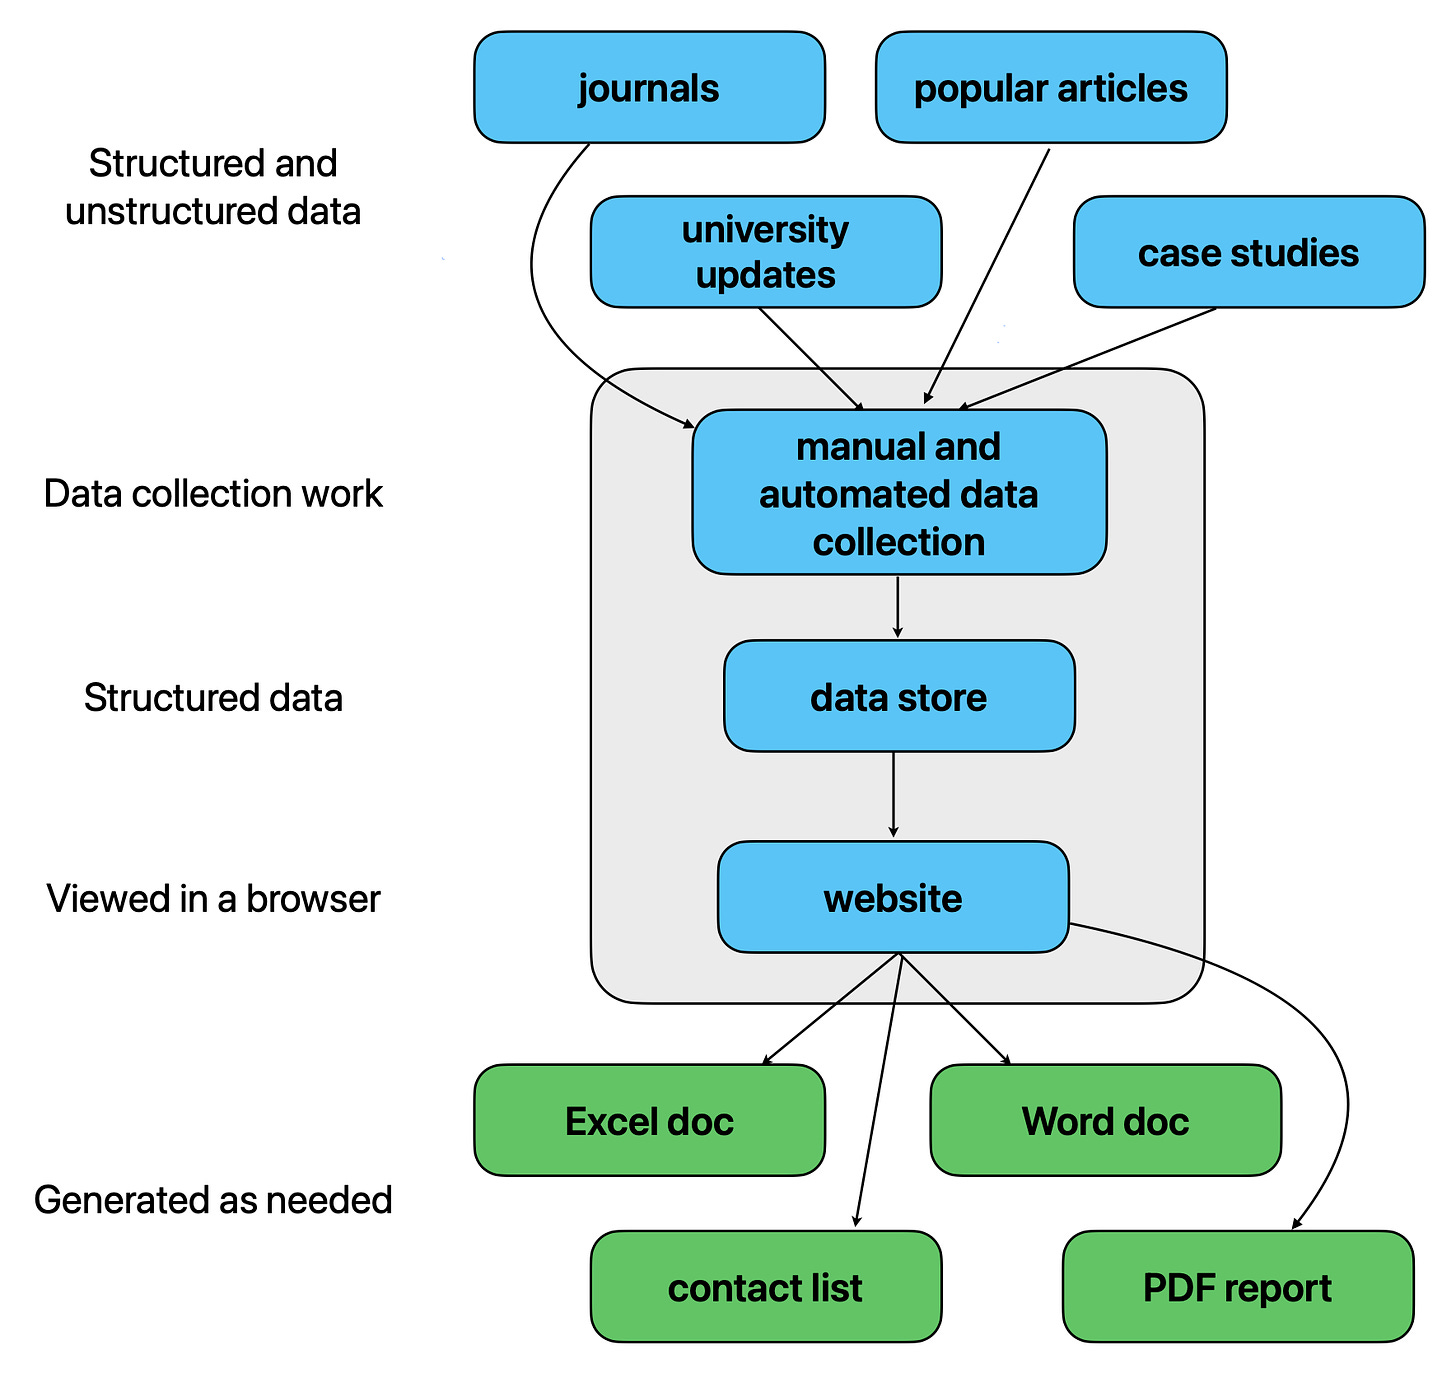 Diagram showing data flowing from external sources, into the backend of a website, and also showing that people can download an Excel doc, Word doc, contact list, or PDF report from the website.